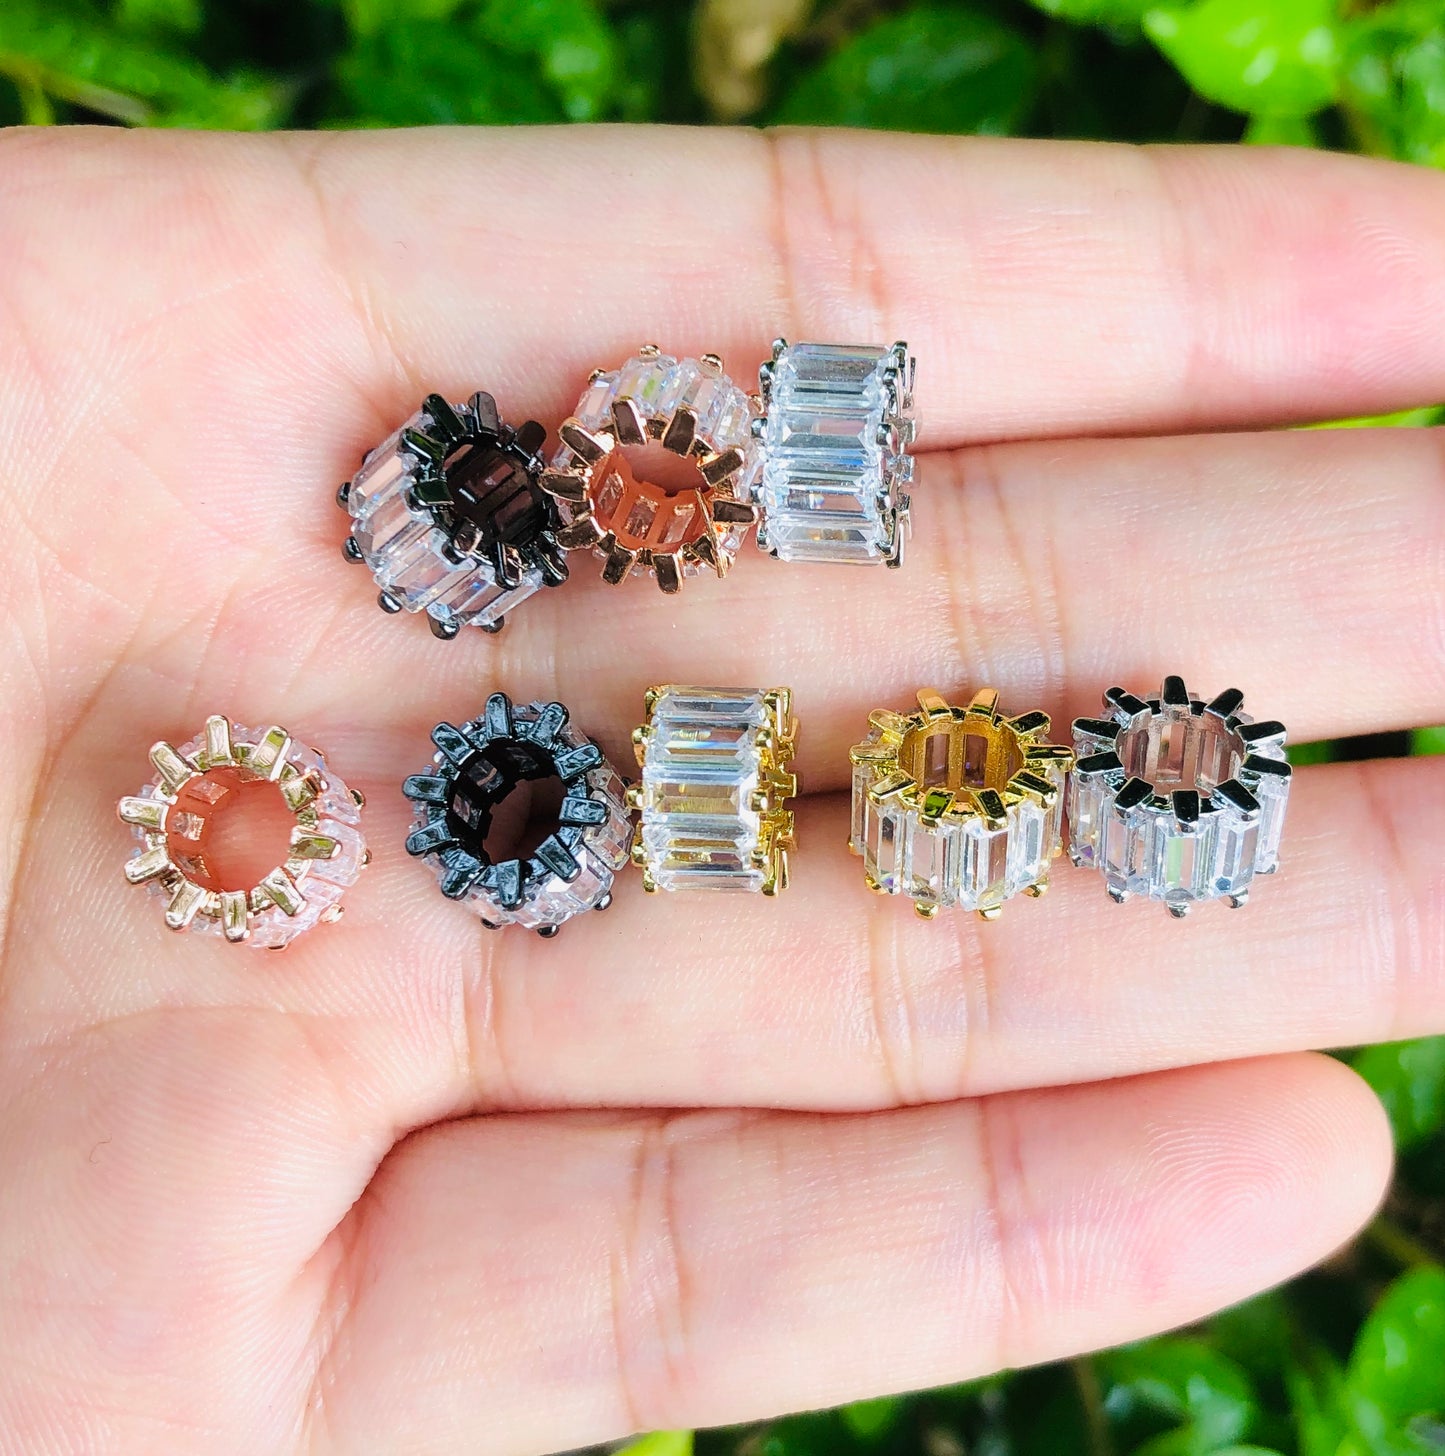 10pcs/lot 9.5*6.4mm Clear CZ Paved Big Hole Spacers CZ Paved Spacers Big Hole Beads New Spacers Arrivals Charms Beads Beyond